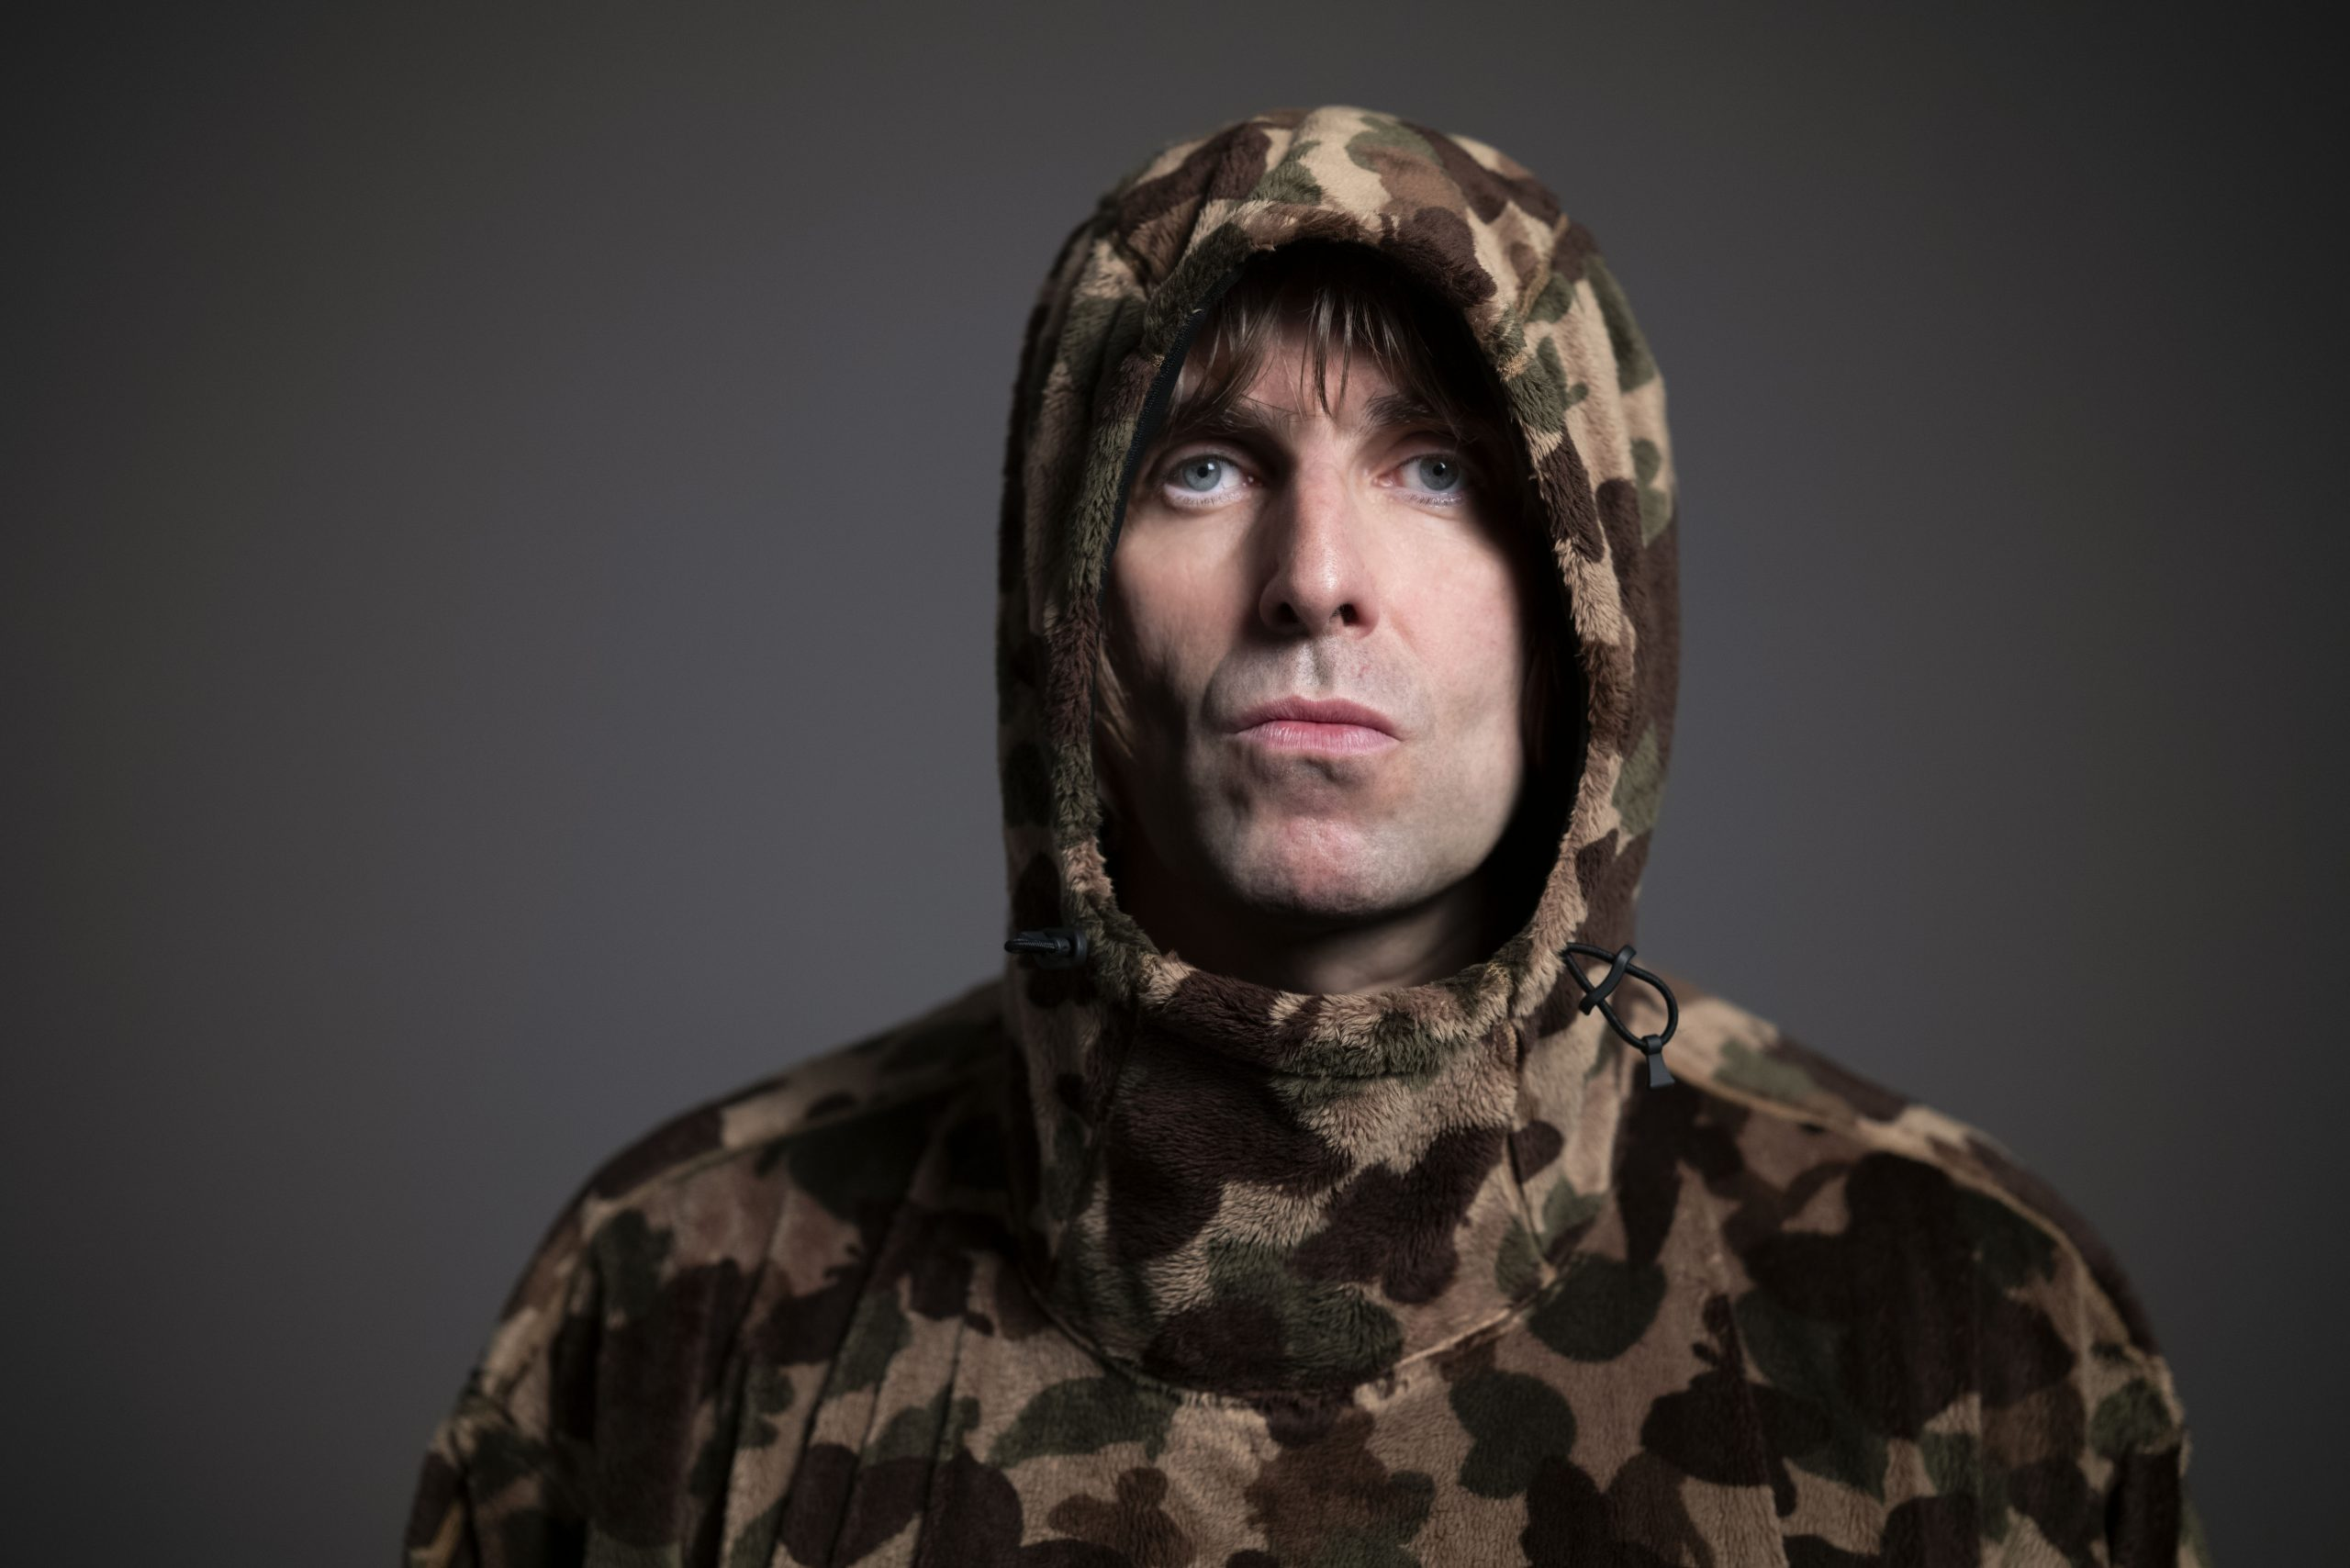 Liam Gallagher on his new music, collab with Dave Grohl, love of Canada